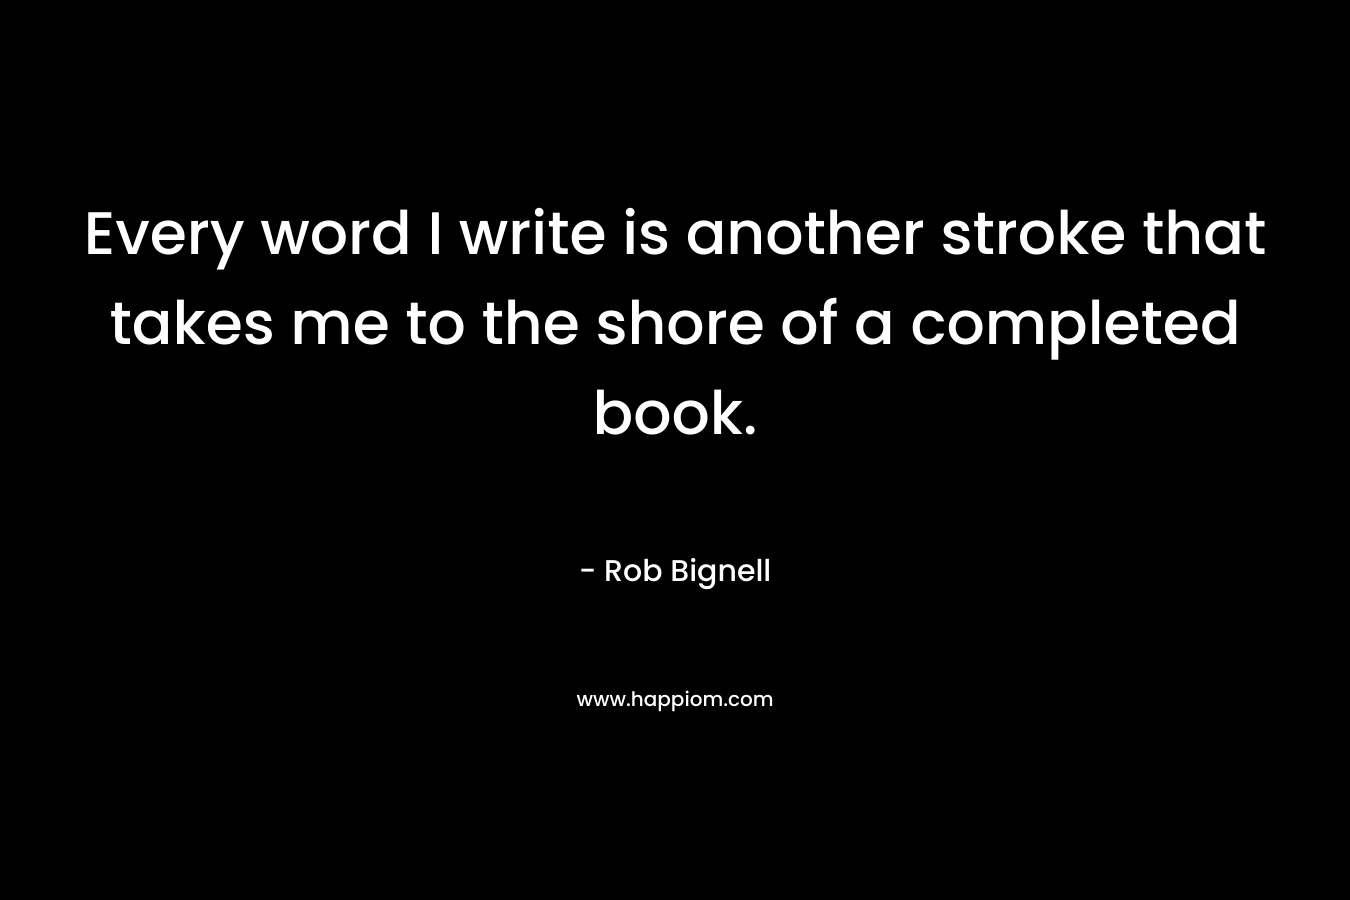 Every word I write is another stroke that takes me to the shore of a completed book.